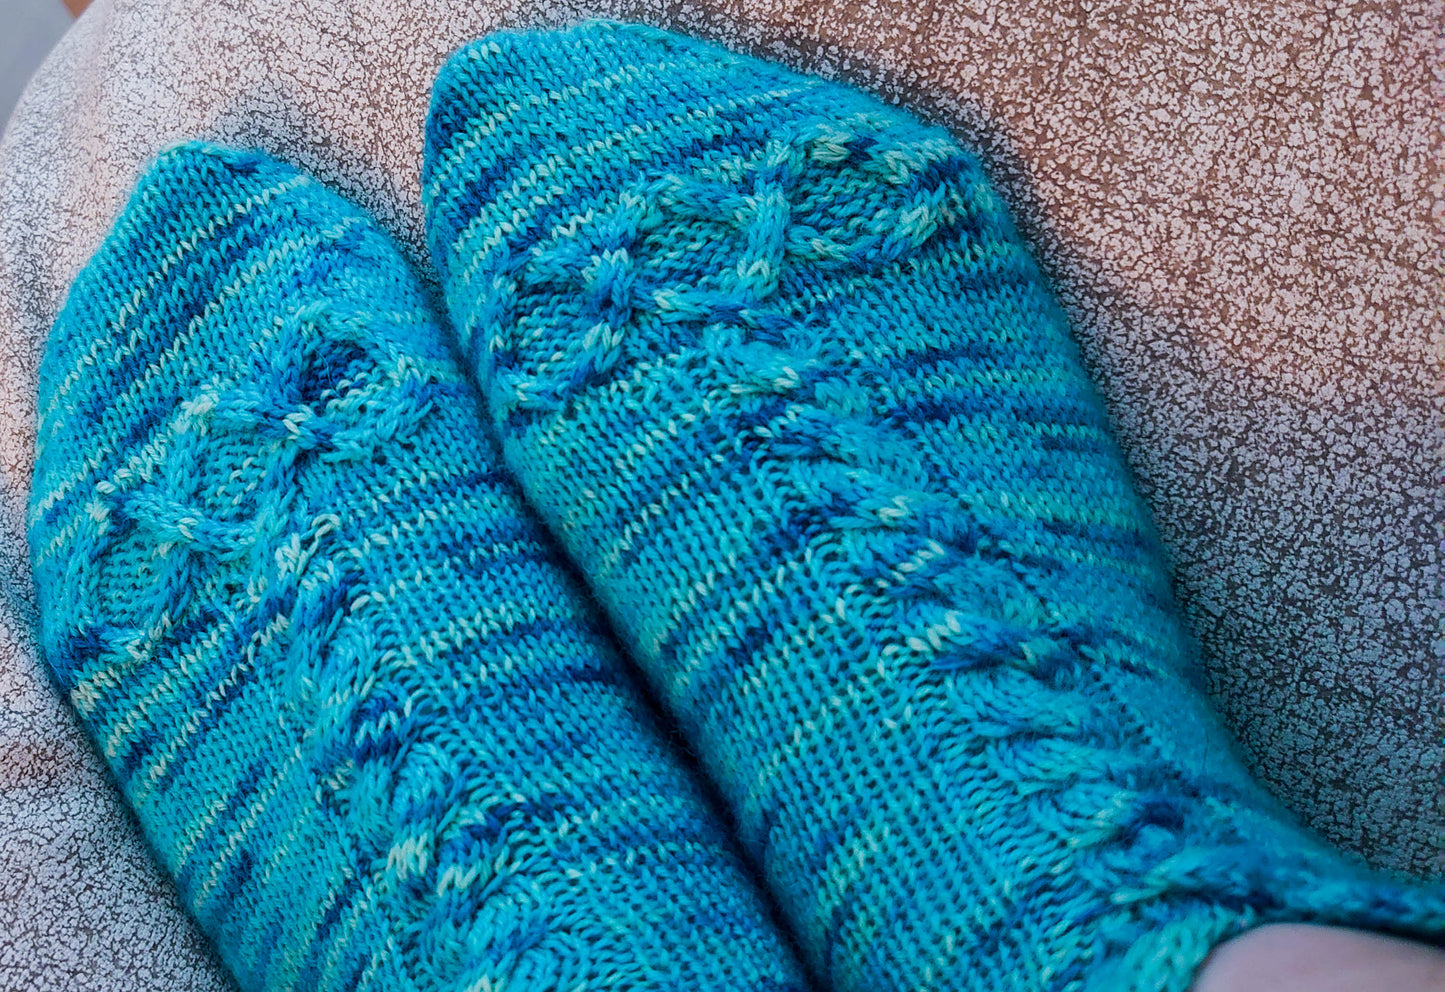 Infinity x infinity - Cable Sock Knitting Pattern